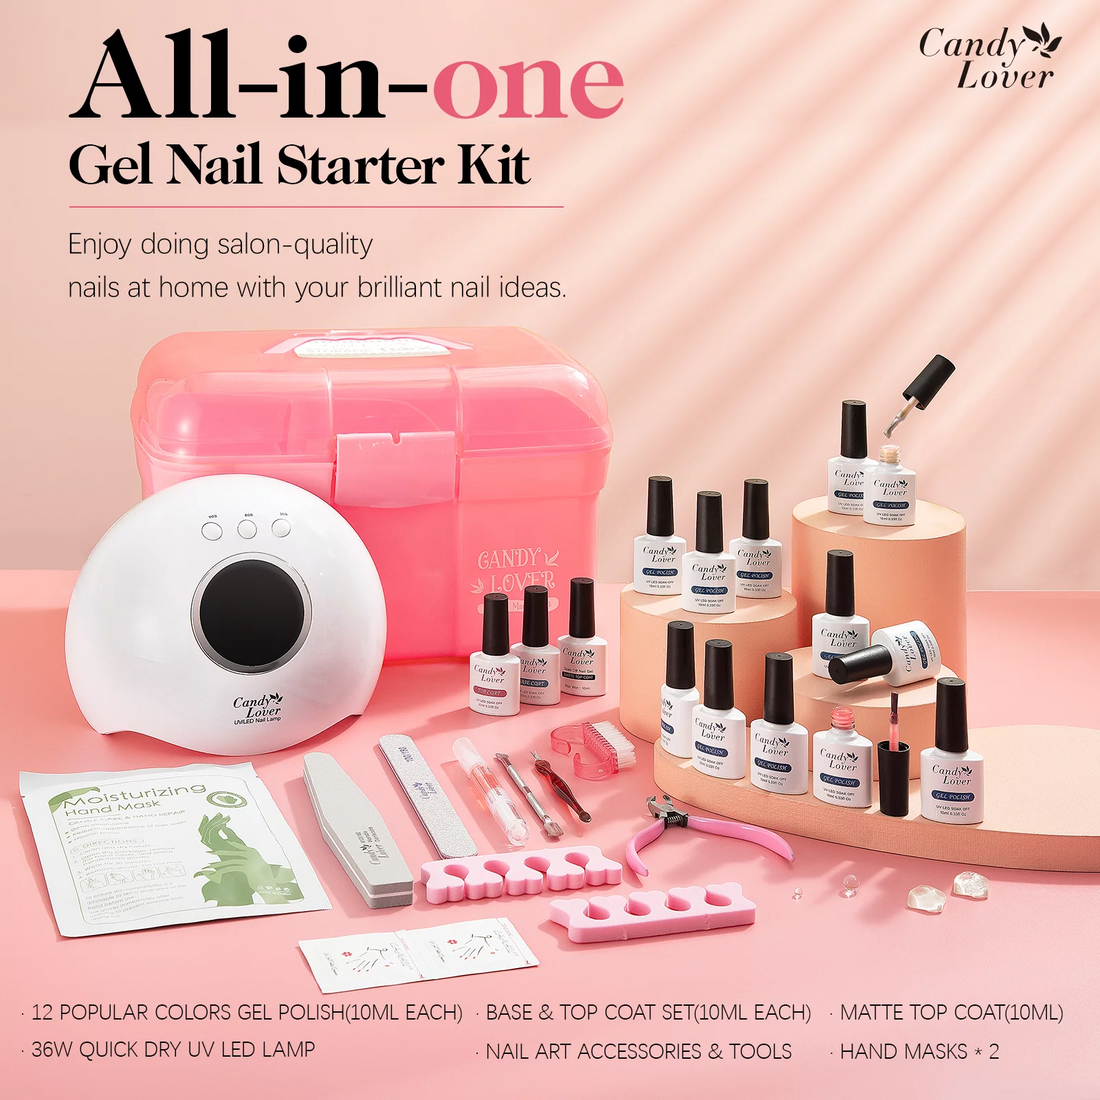 Candy Lover Gel Nail Kit with UV LED Lamp, Natural Quick Dry Gel Polish, 12 Colors Soak Off Gel Polish Starter Home Kit with Base Top Coat Gel Polish Set, Nail Art Accessories Free Storage Box